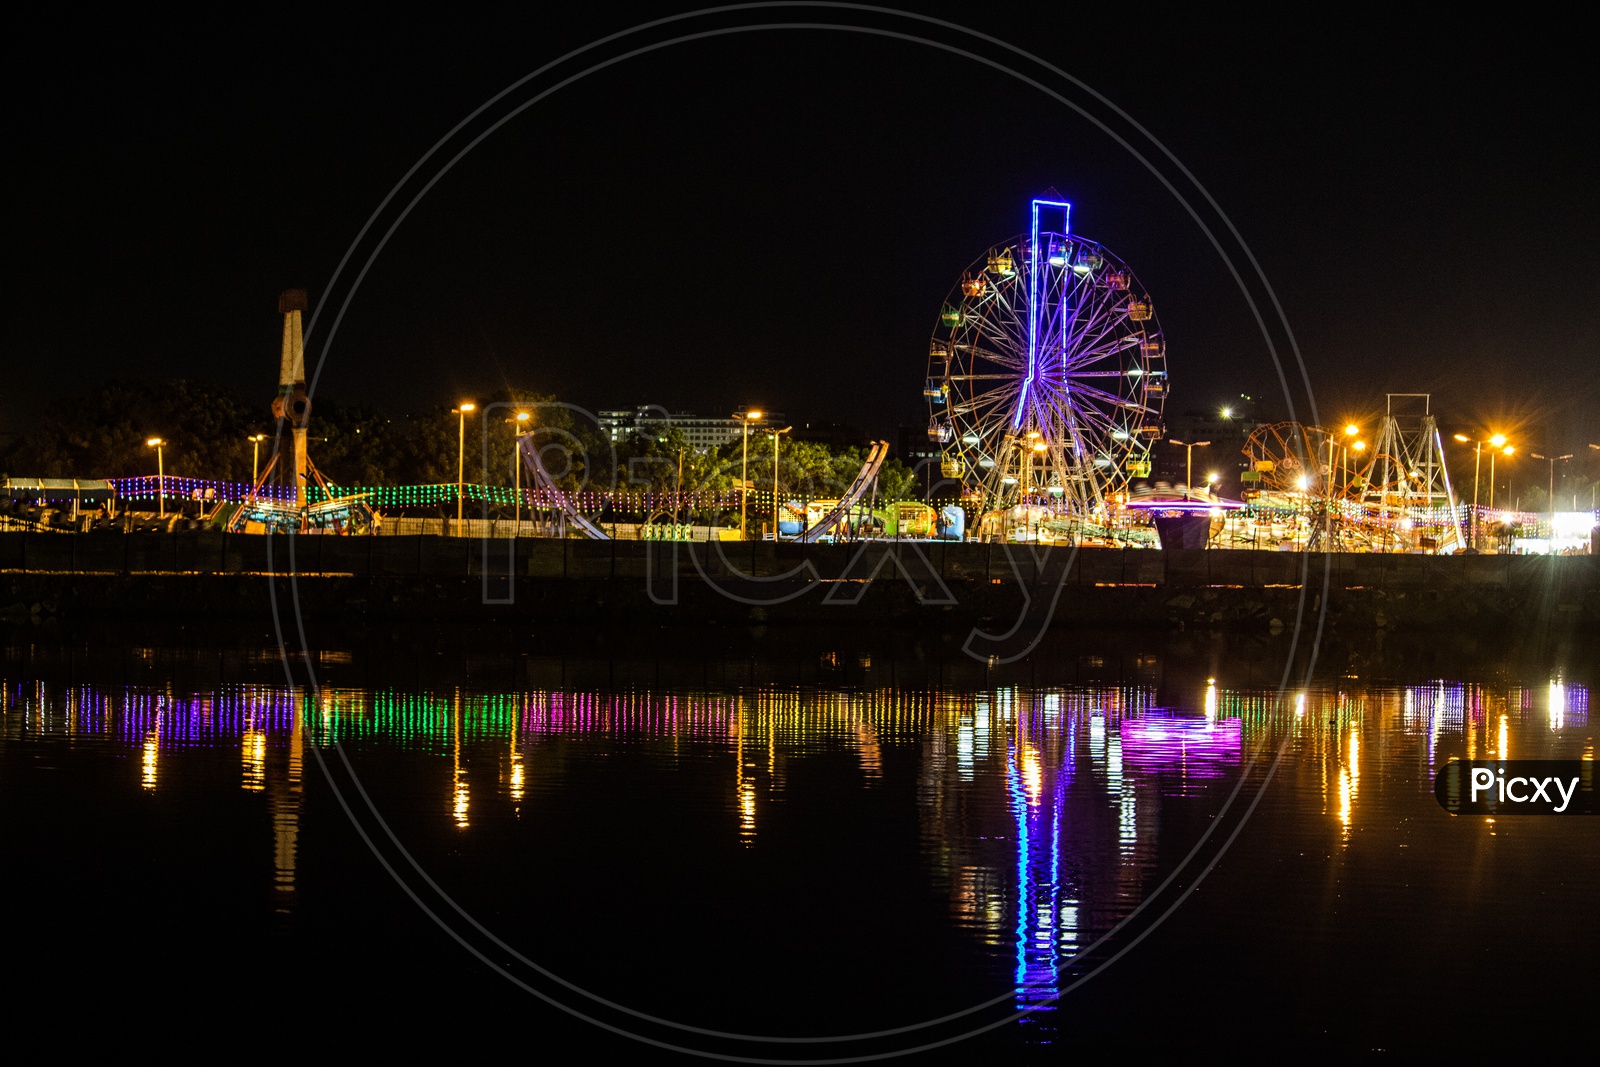 Giant Wheel Reflections at Island Grounds Exhibition